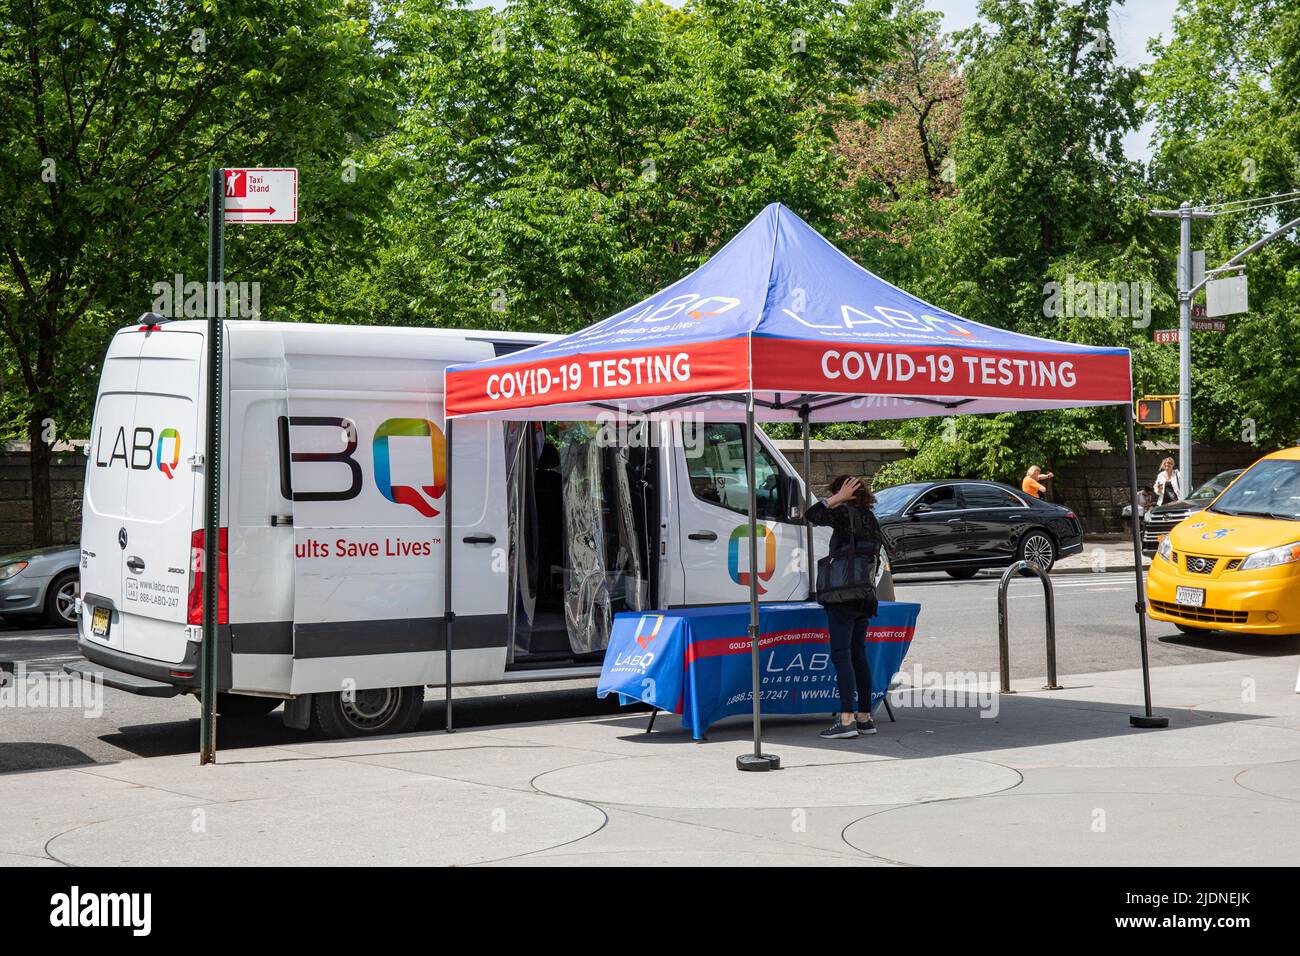 LABQ Covid-19 mobile testing unit on 5th Avenue in Upper East Side on Manhattan, New York City, United States of America Stock Photo